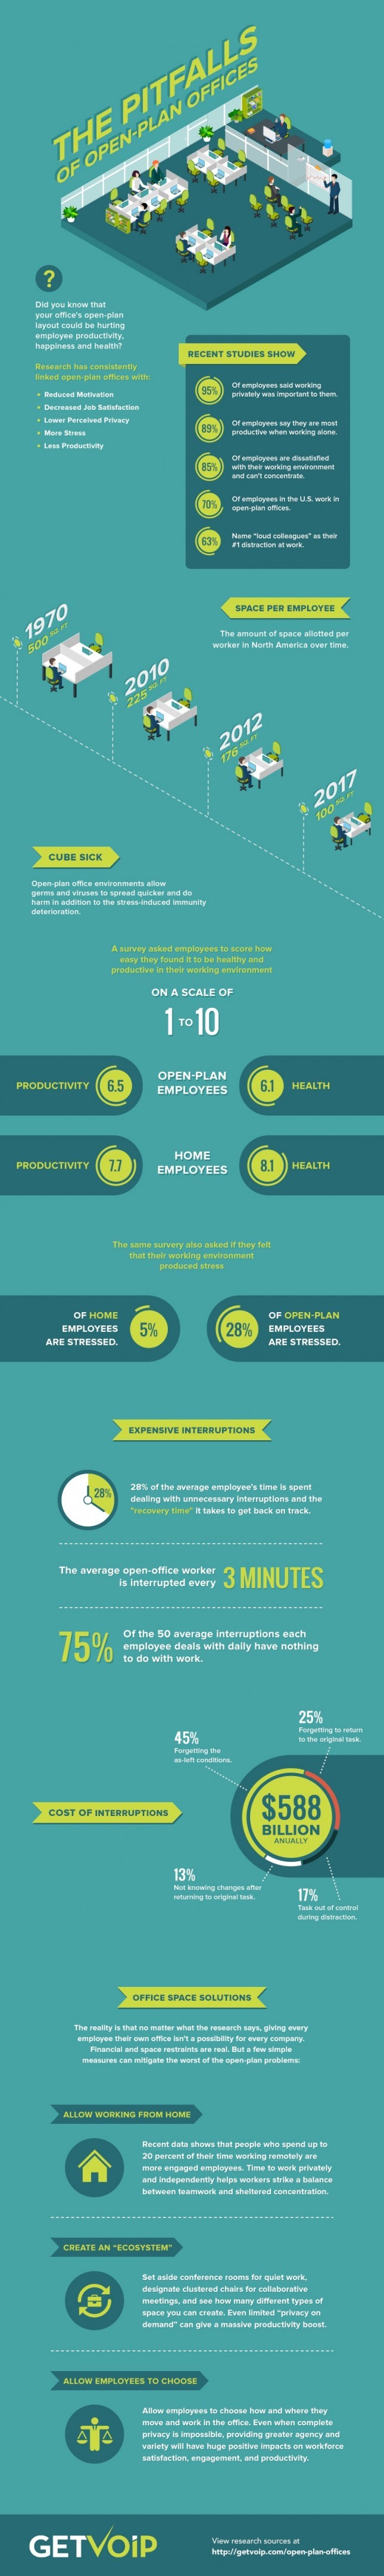 open-plan-offices-infographic